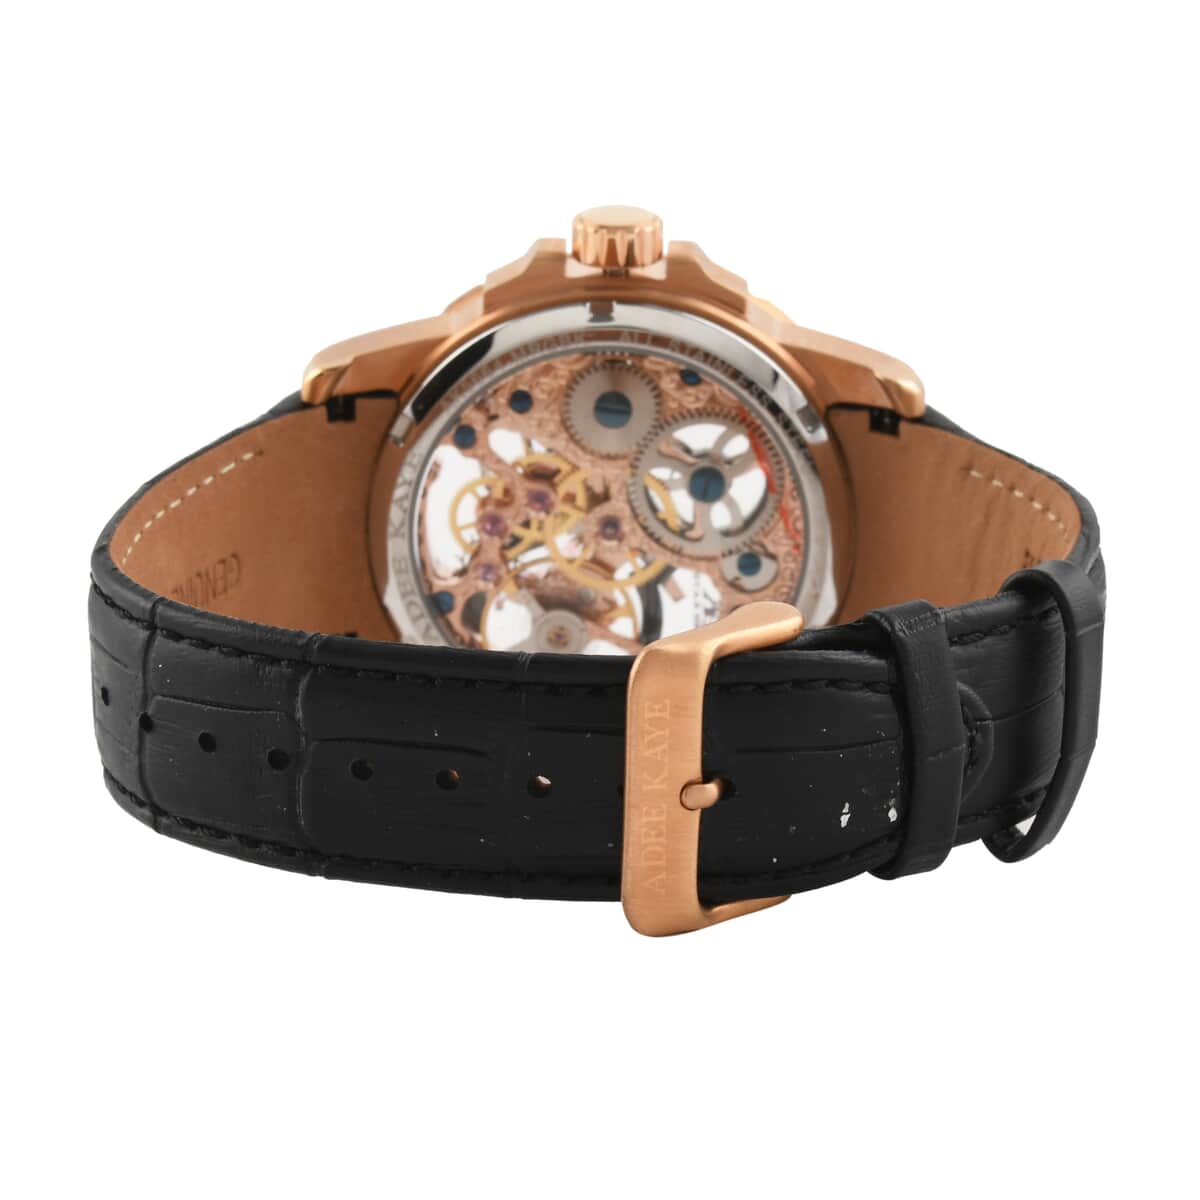 ADEE KAYE La Gear Mechanical Movement Watch with Genuine Leather Strap in Black (48mm) image number 3